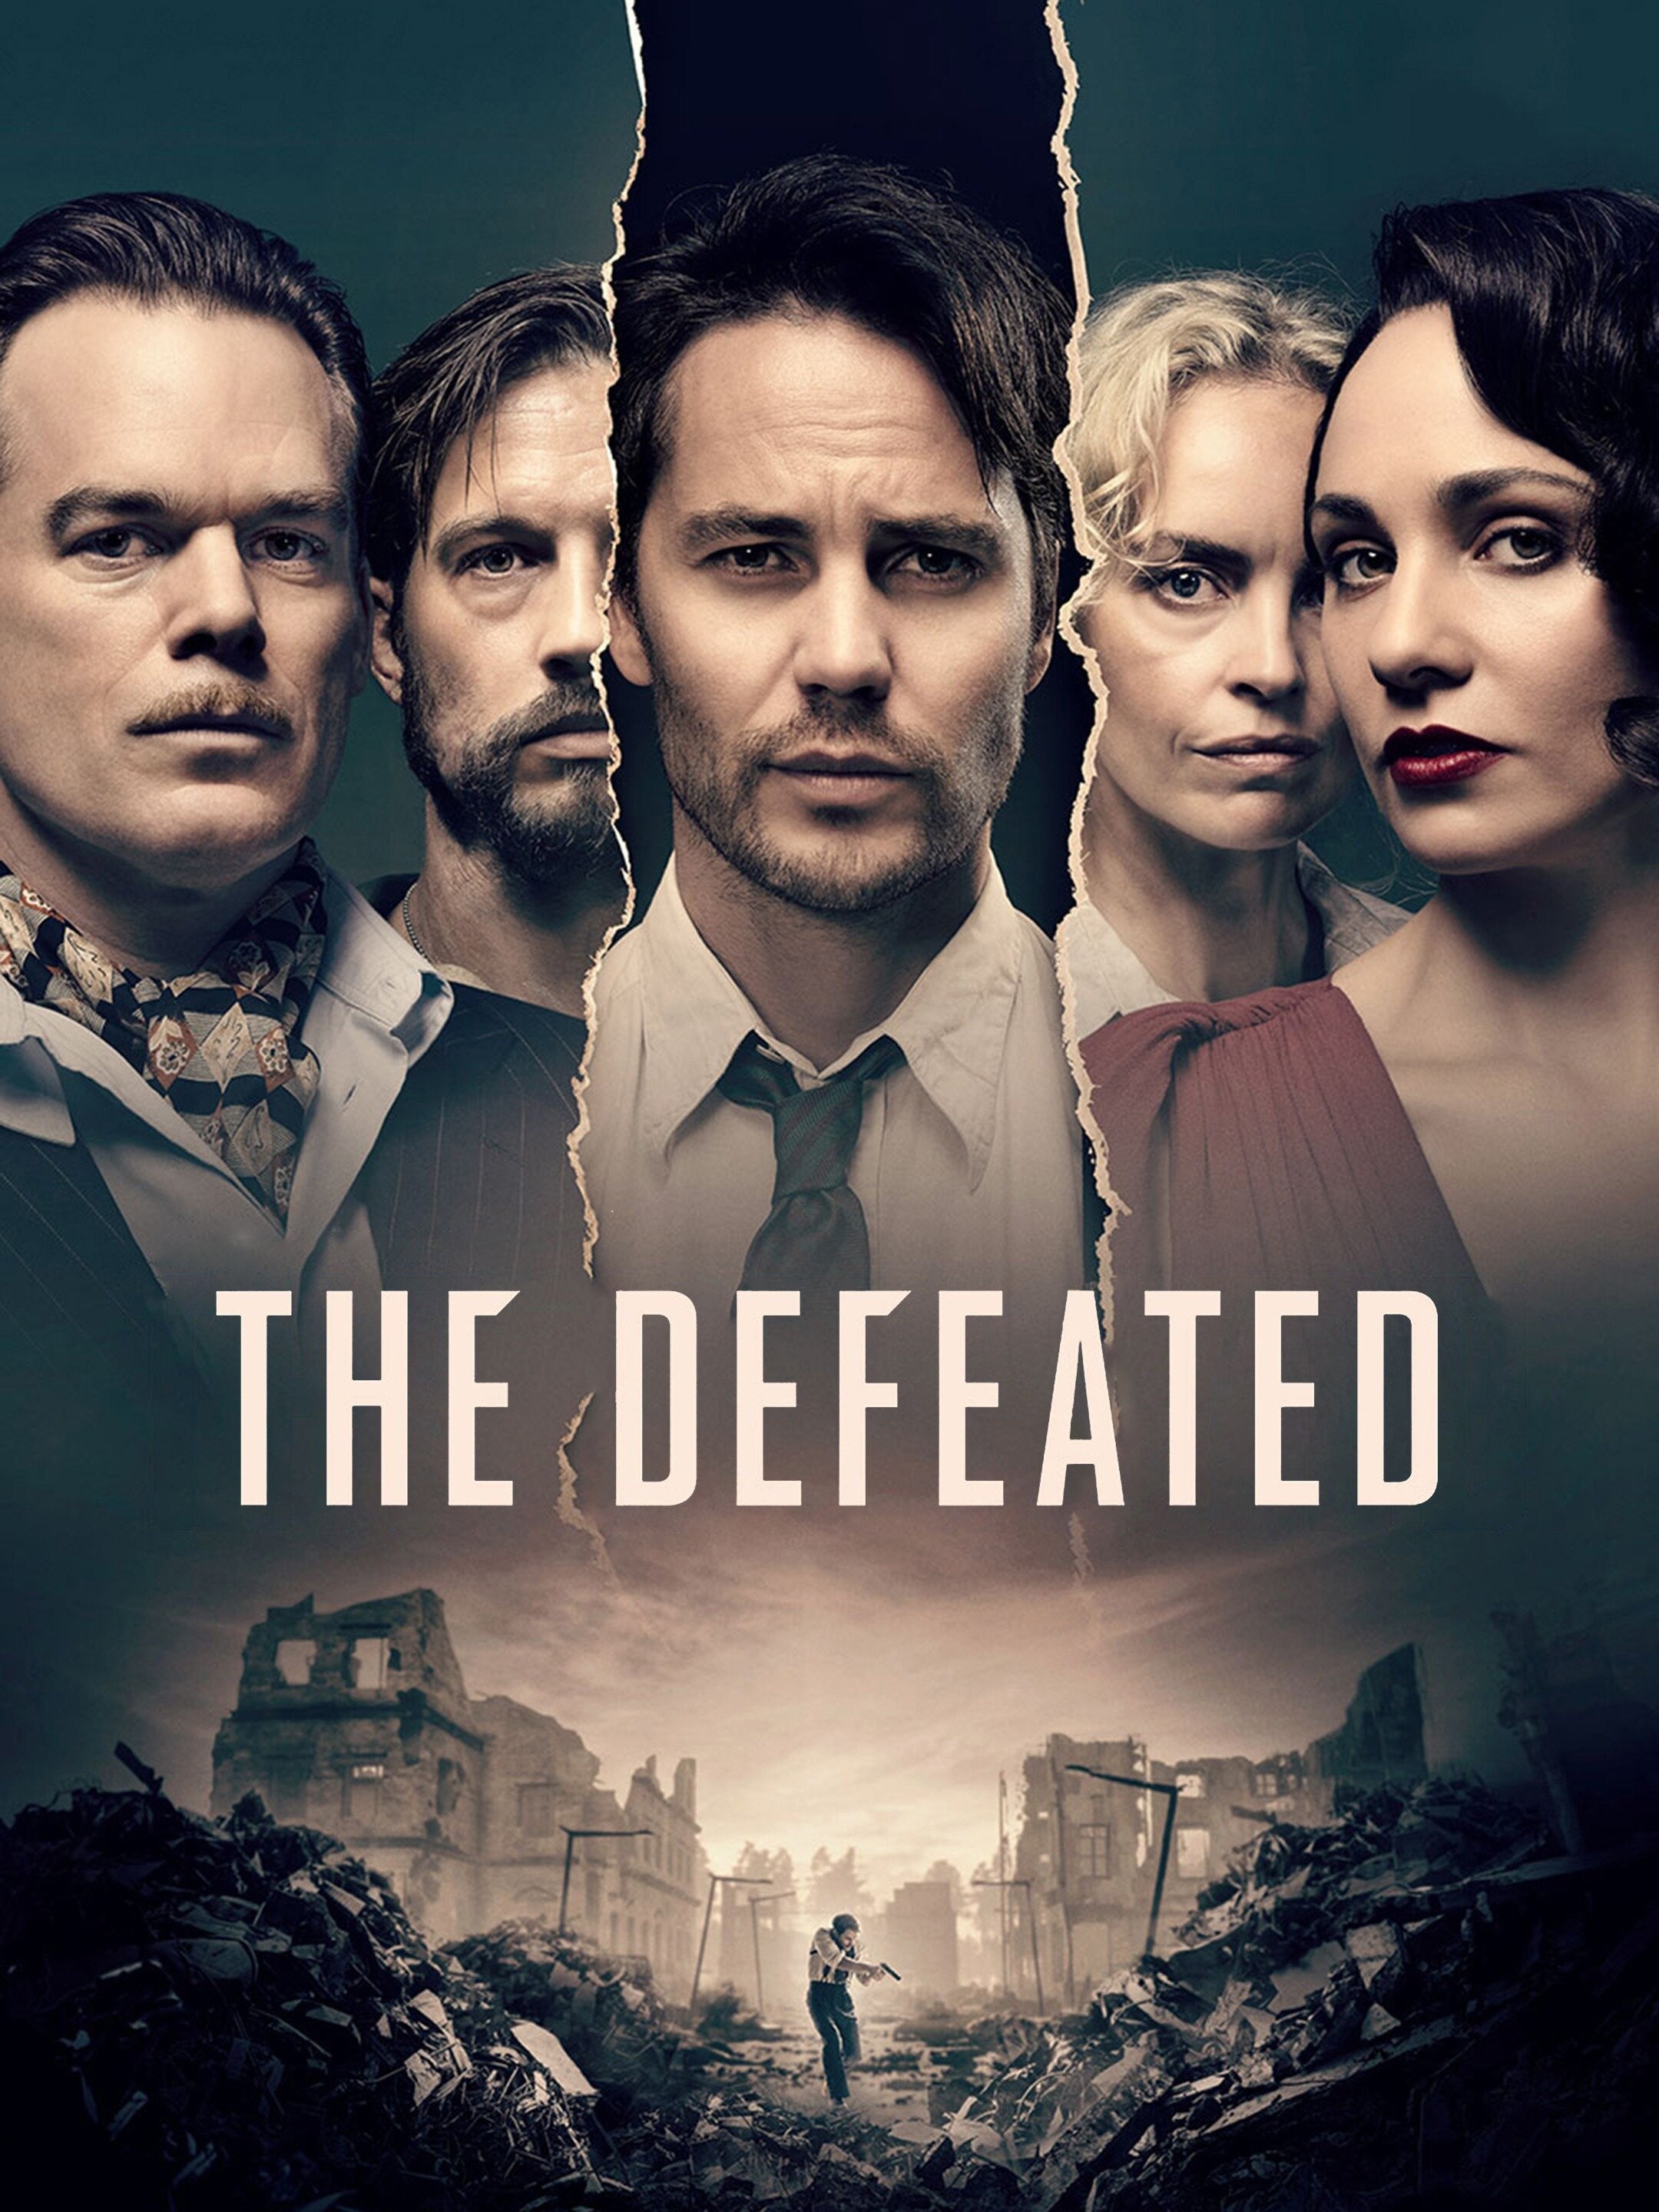 The Defeated TV show, Post-WWII mysteries, Intrigue and espionage, Twists and turns, 2160x2880 HD Handy